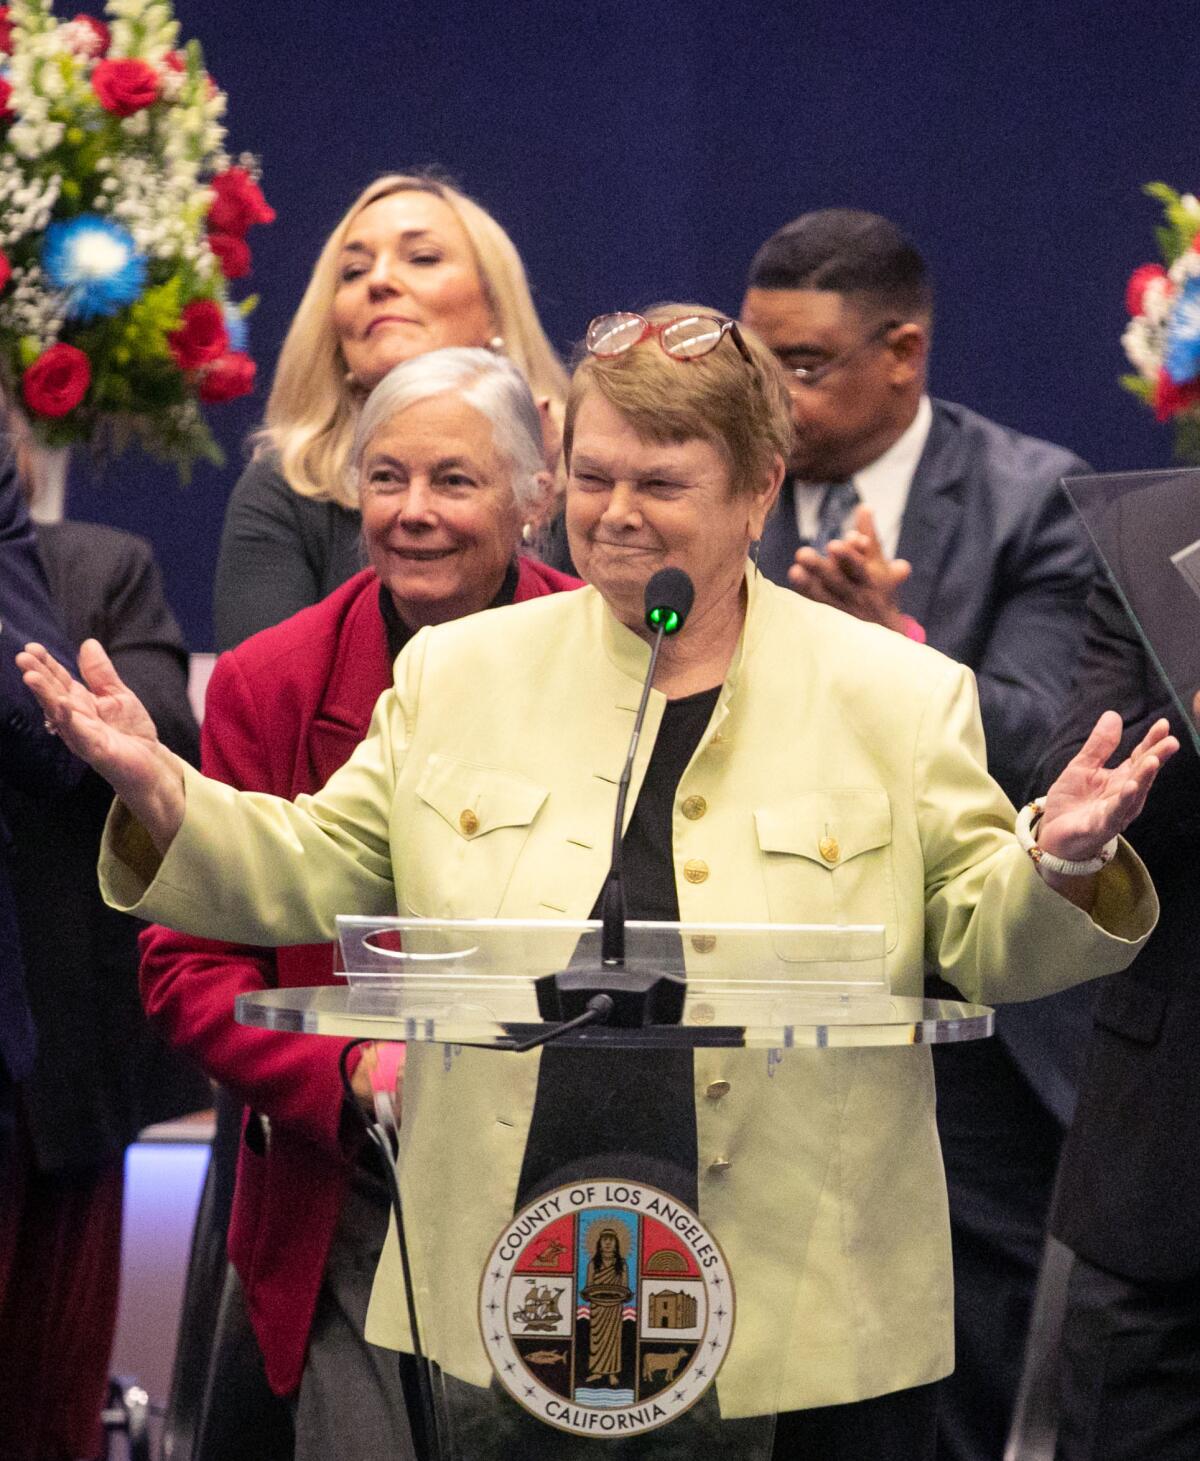 Sheila Kuehl smiles at a lectern and raises her hands as colleagues stand behind her.